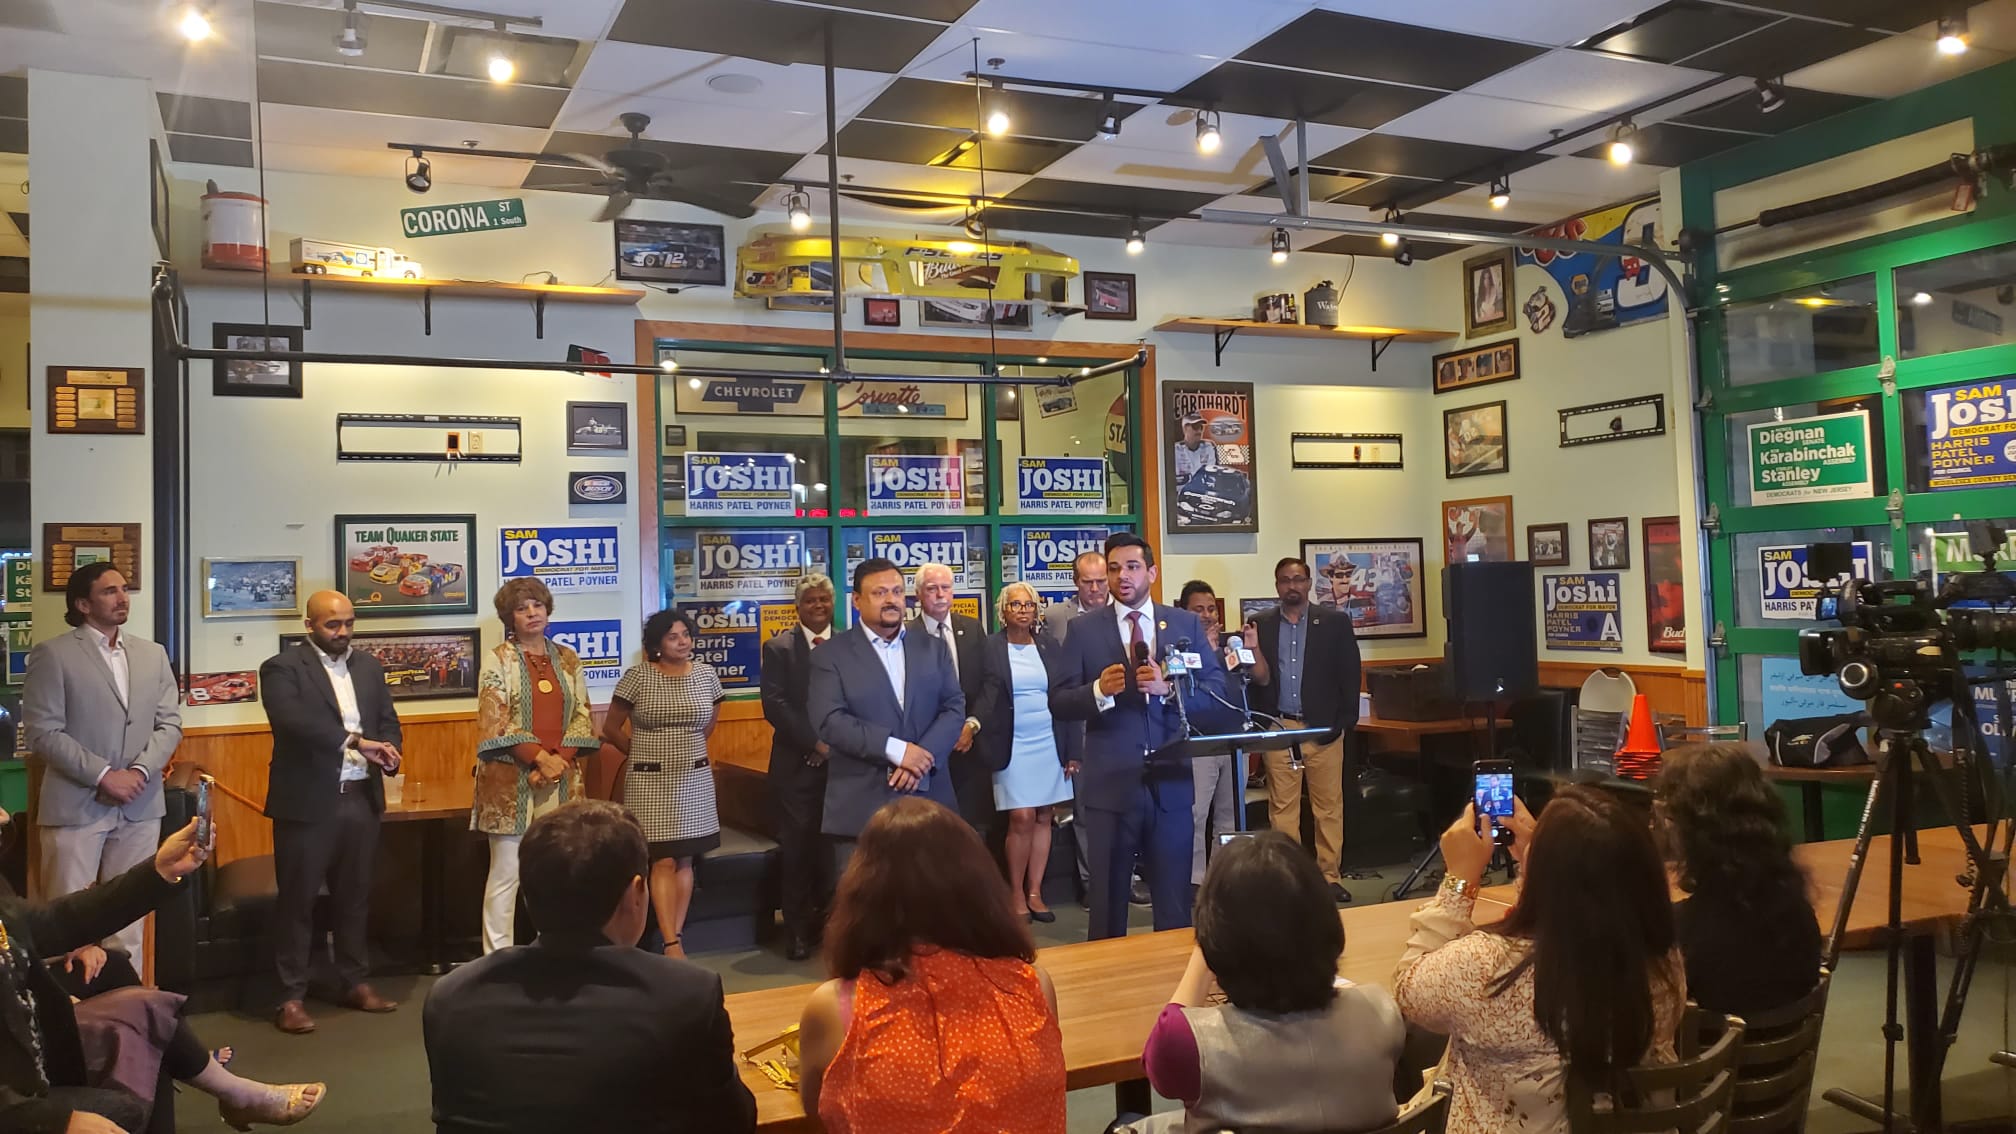 Sam Khan hosts a reception event for Sam Joshi and Democratic Party leaders in New Jersey